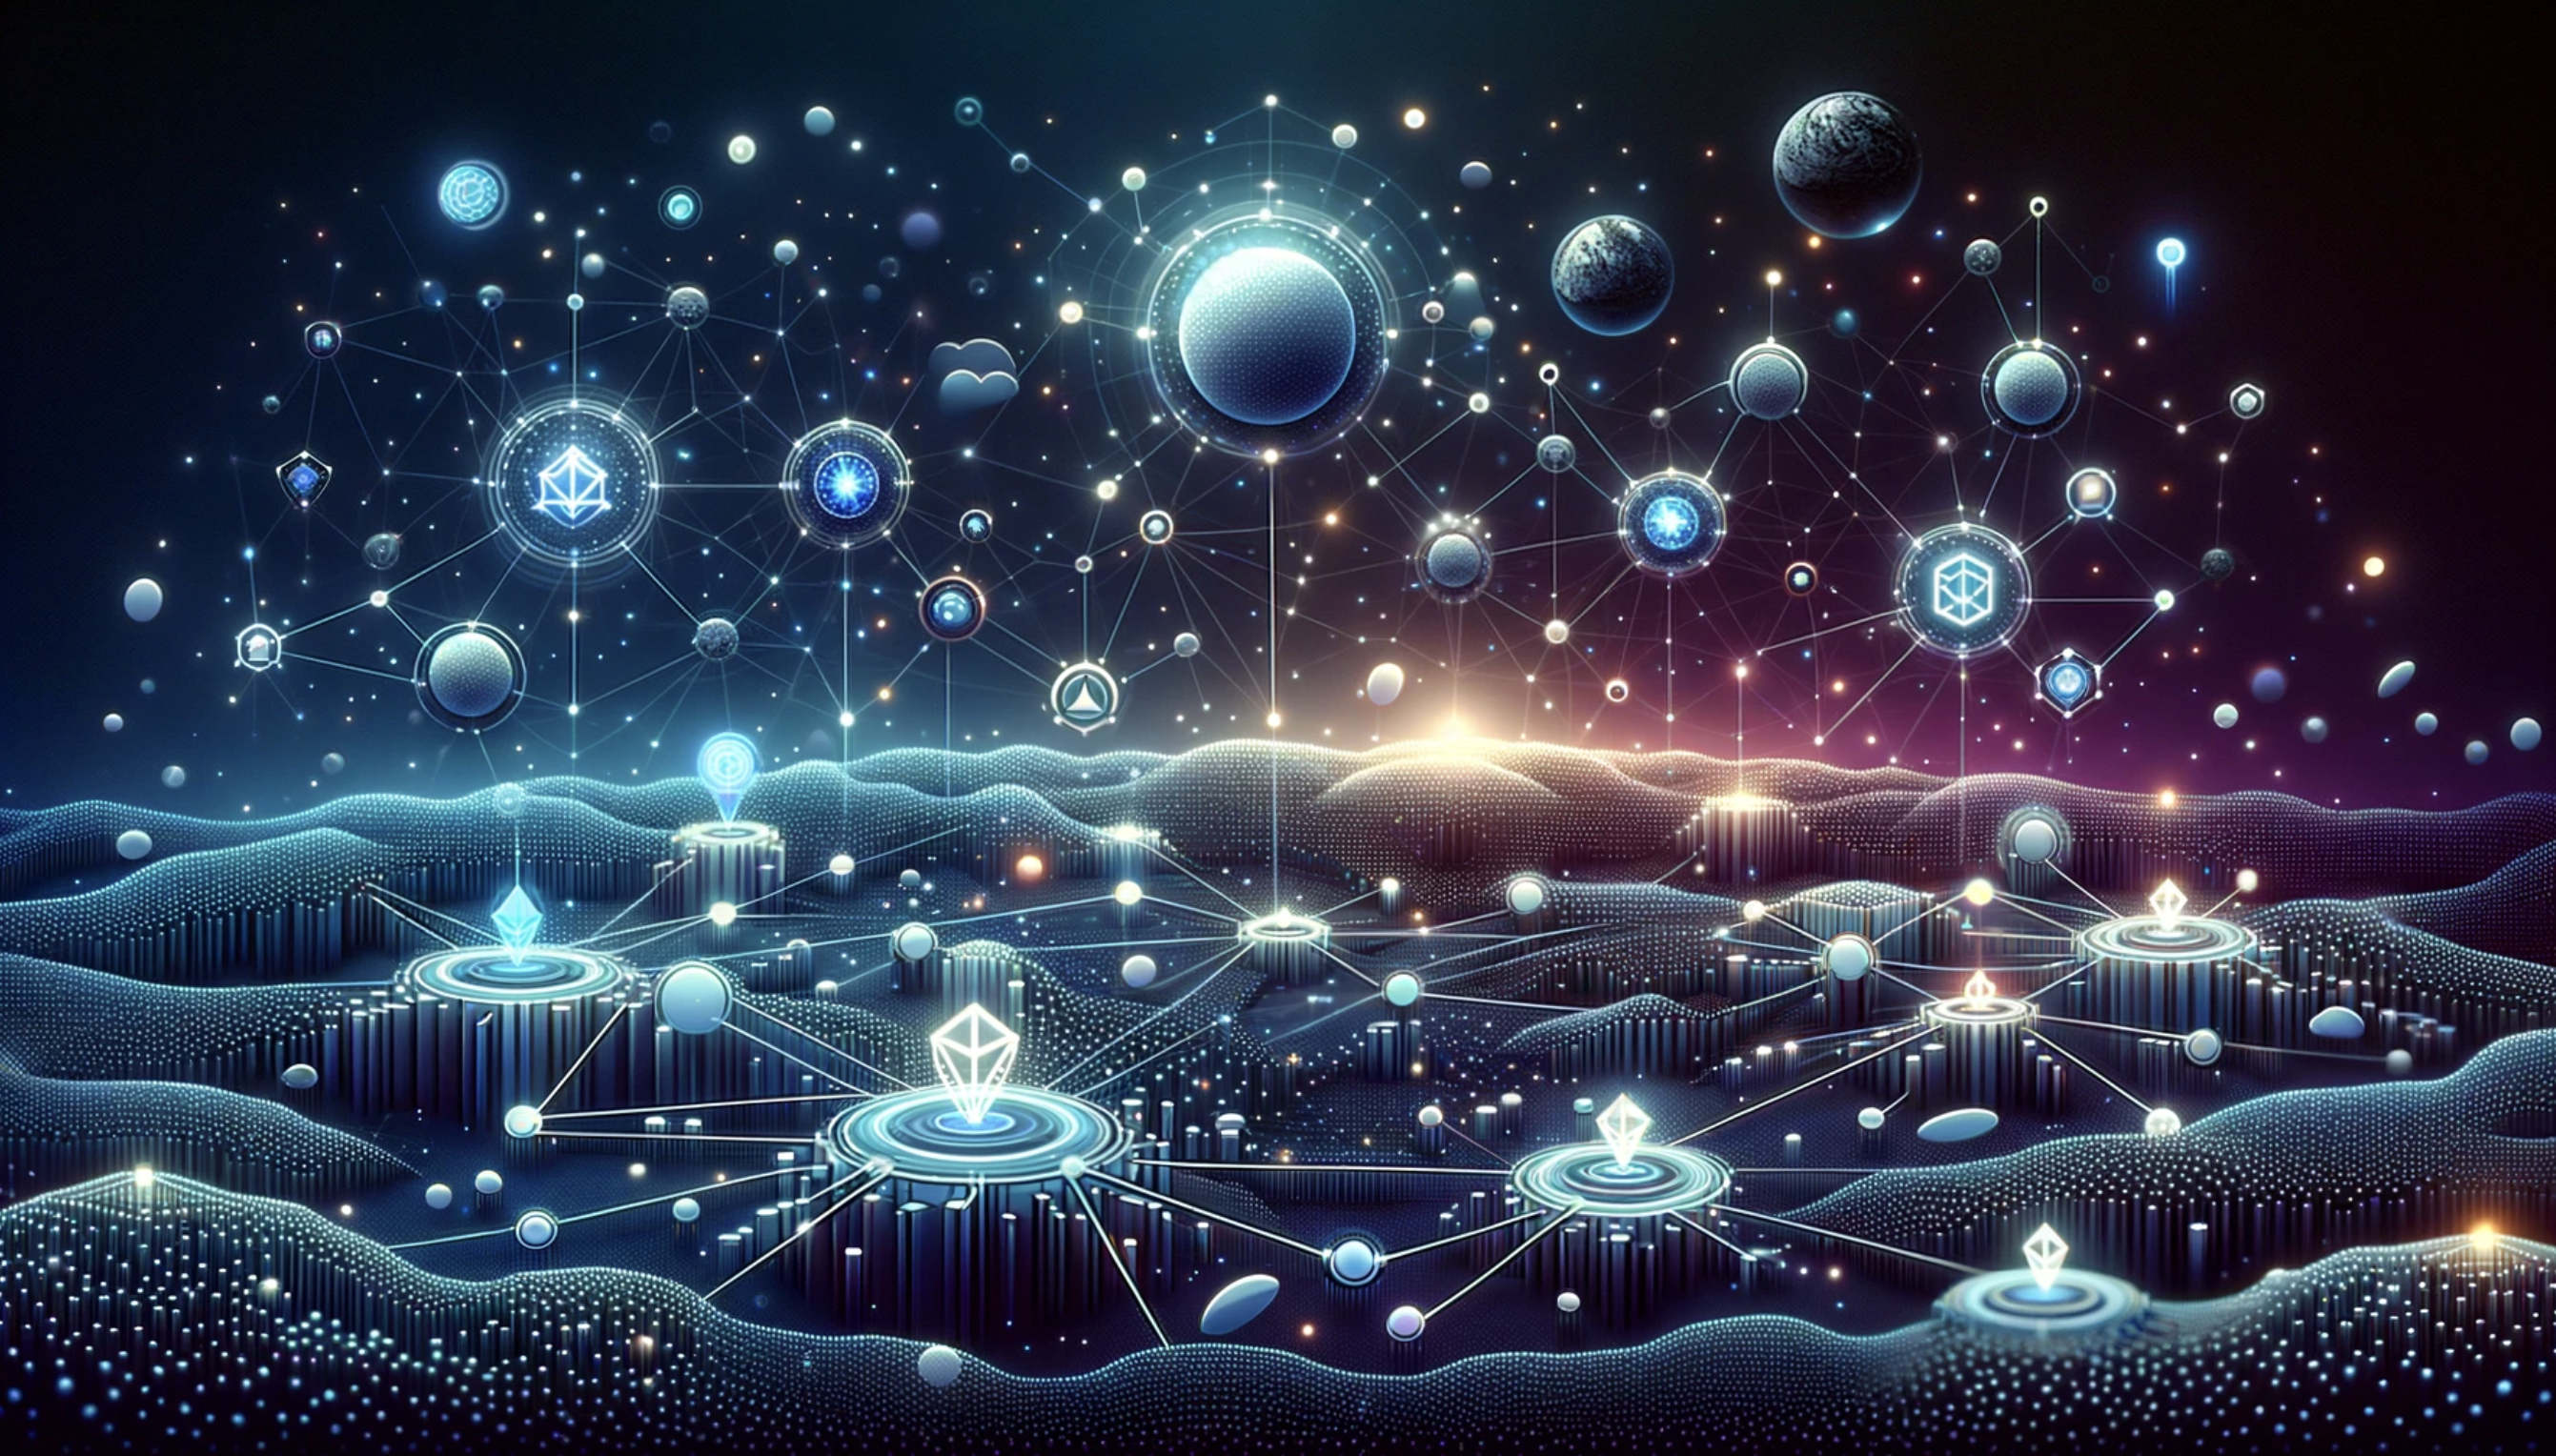 illustrative art image - showing the Cosmos ecosystem, depicted as a universe, with blockchain components